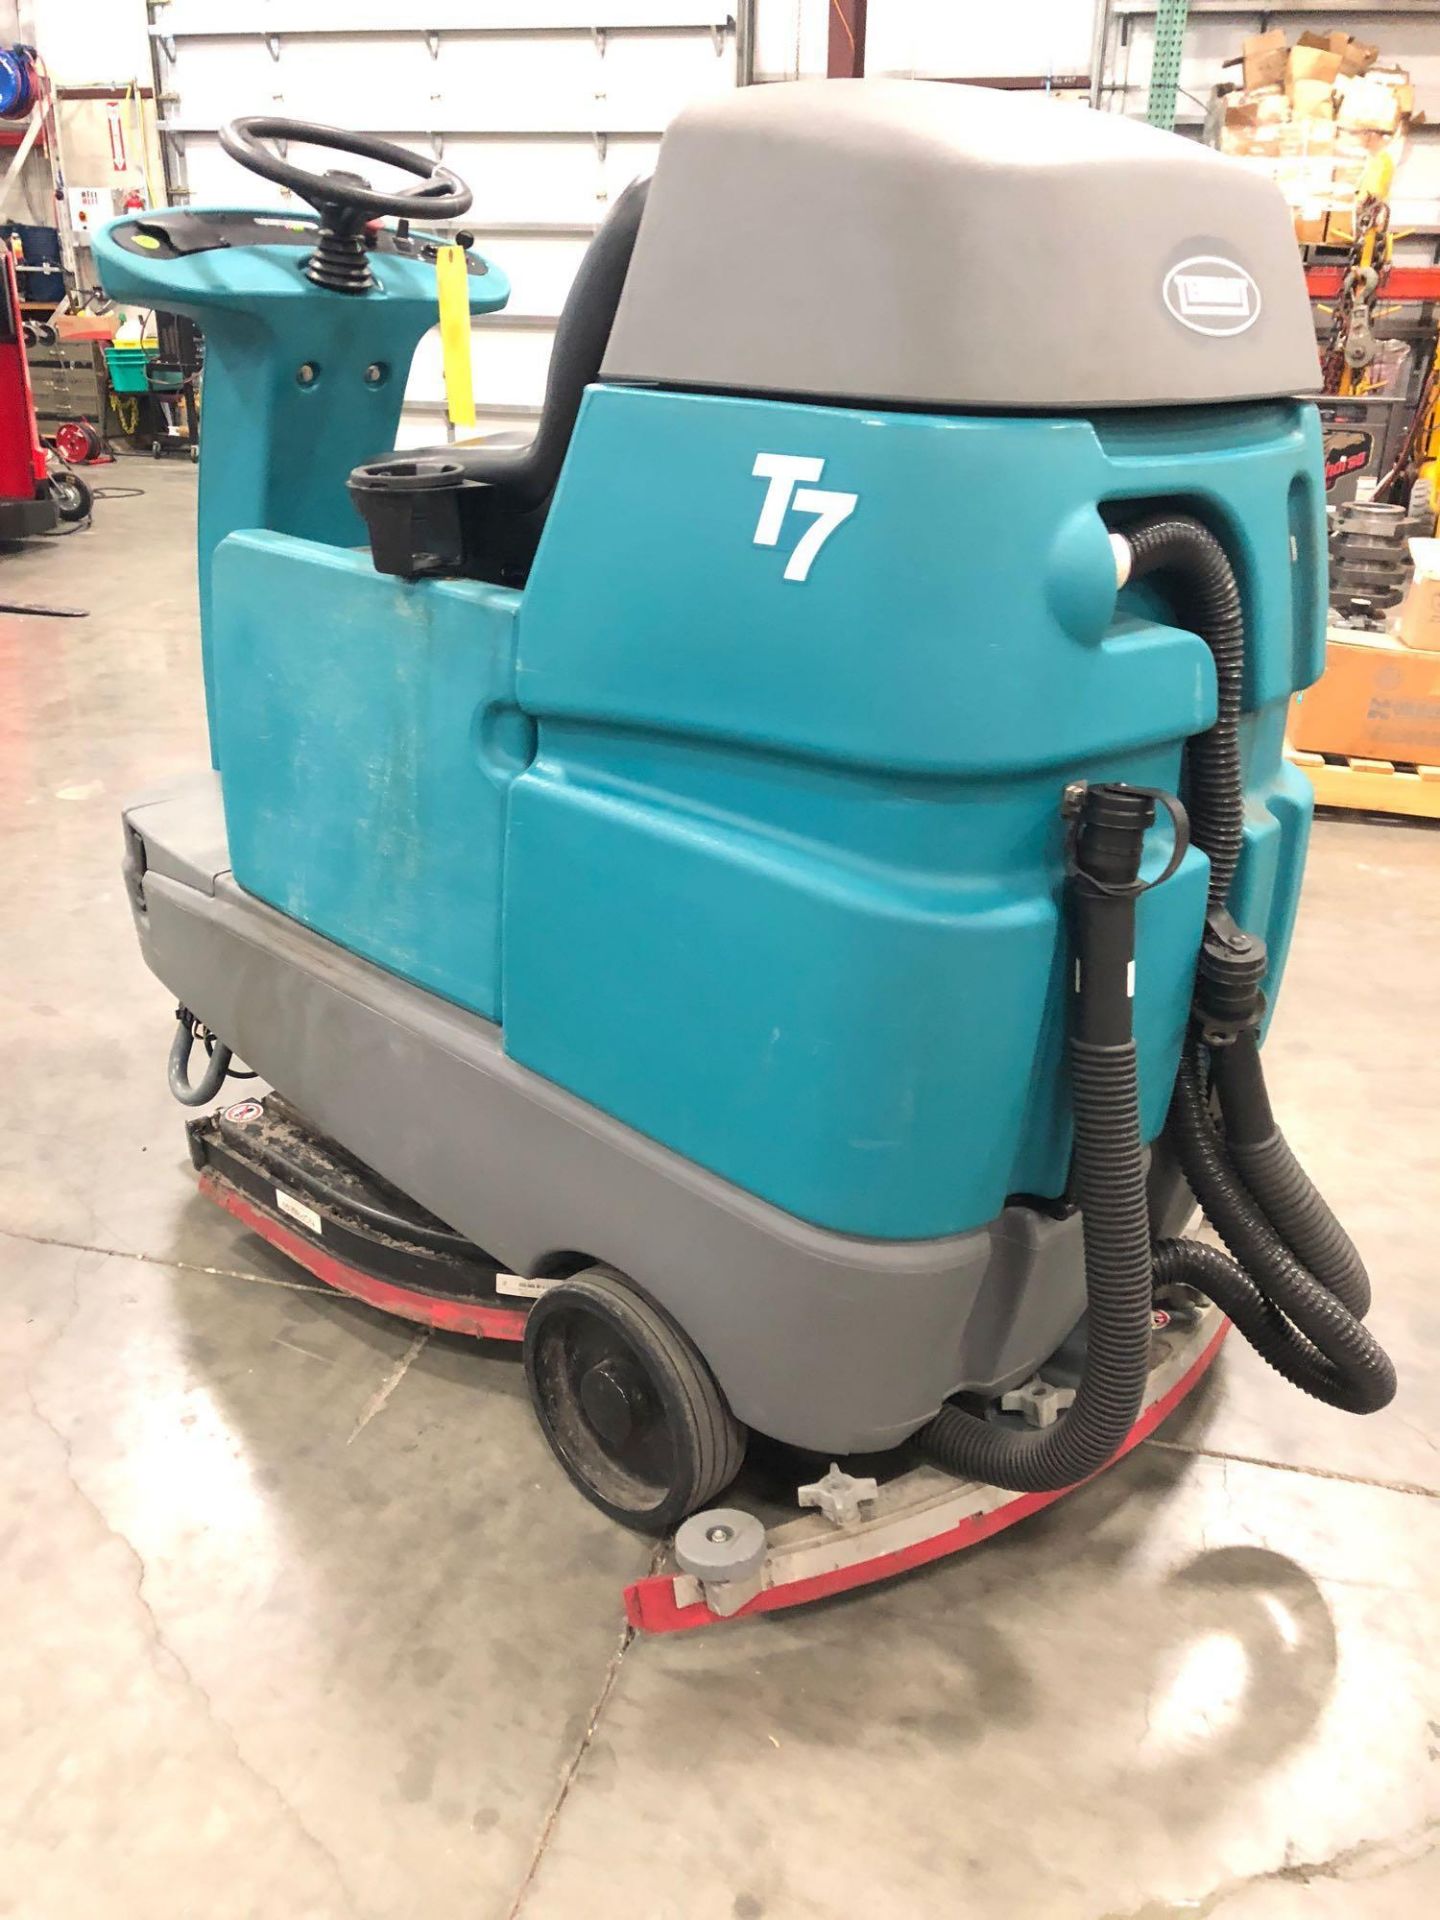 2015 TENNANT T7 ELECTRIC FLOOR SCRUBBER, BUILT IN BATTERY CHARGER, 872 HOURS SHOWING, RUNS - Image 3 of 9